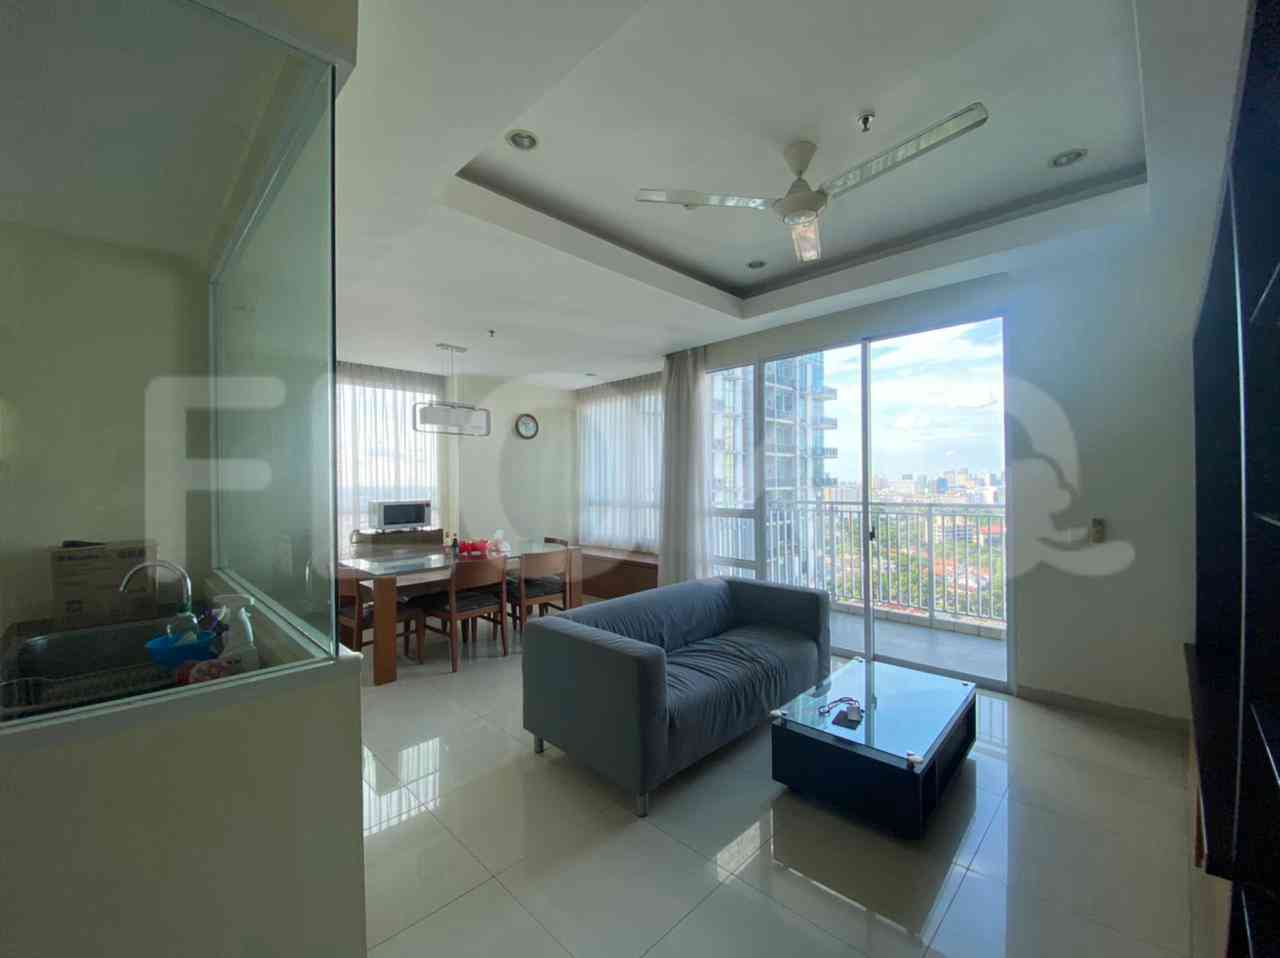 4 Bedroom on 26th Floor for Rent in Essence Darmawangsa Apartment - fci6f3 7